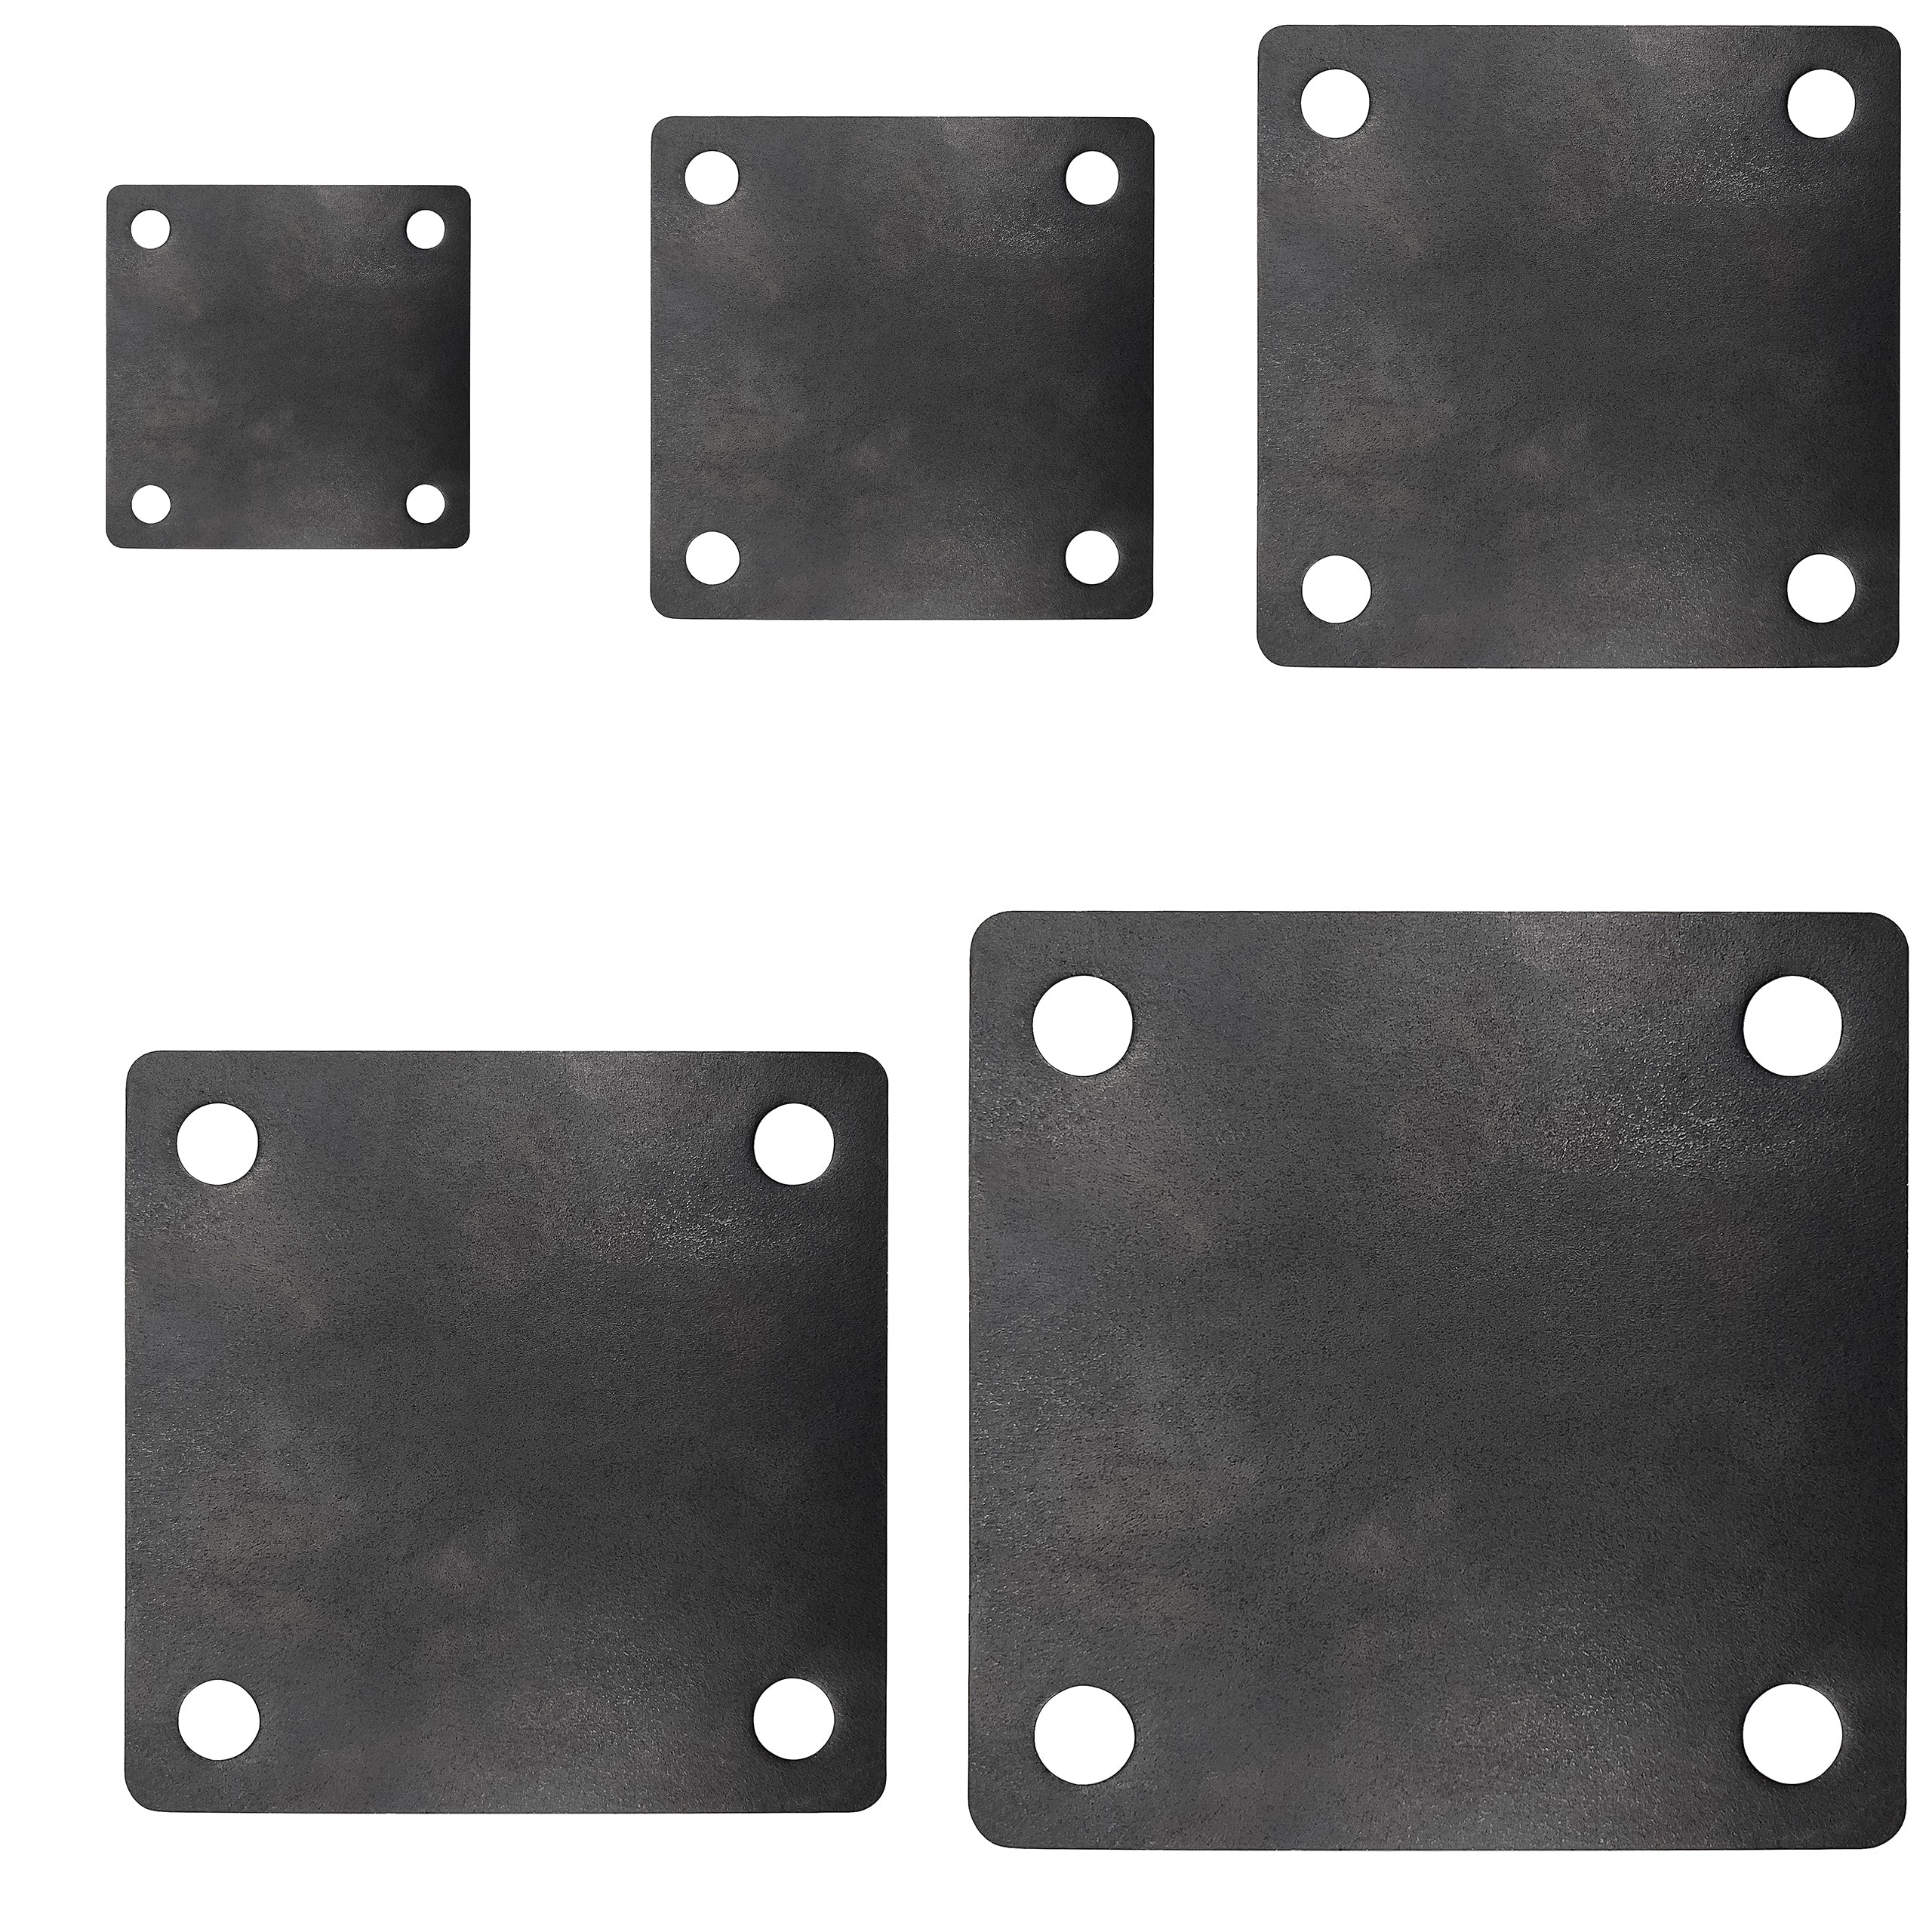 Weldable Square Steel Metal Baseplate – A36 Heavy Duty Carbon Steel